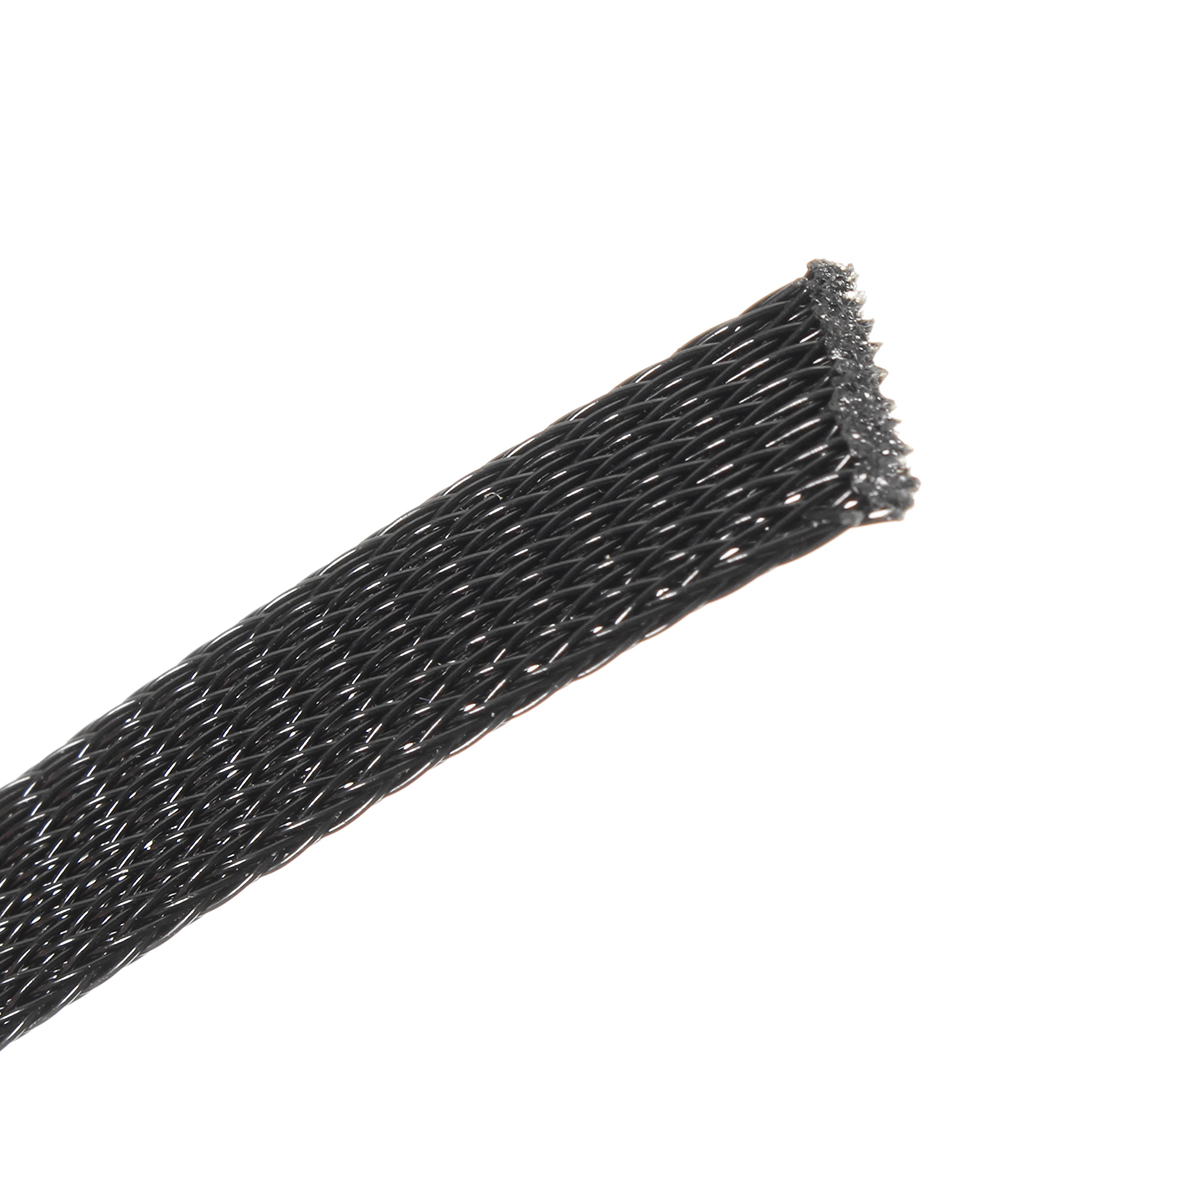 30m-8mm10mm12mm15mm20mm-Expandable-Wire-Cable-Sleeving-Braided-Tubing-Black-1179626-2